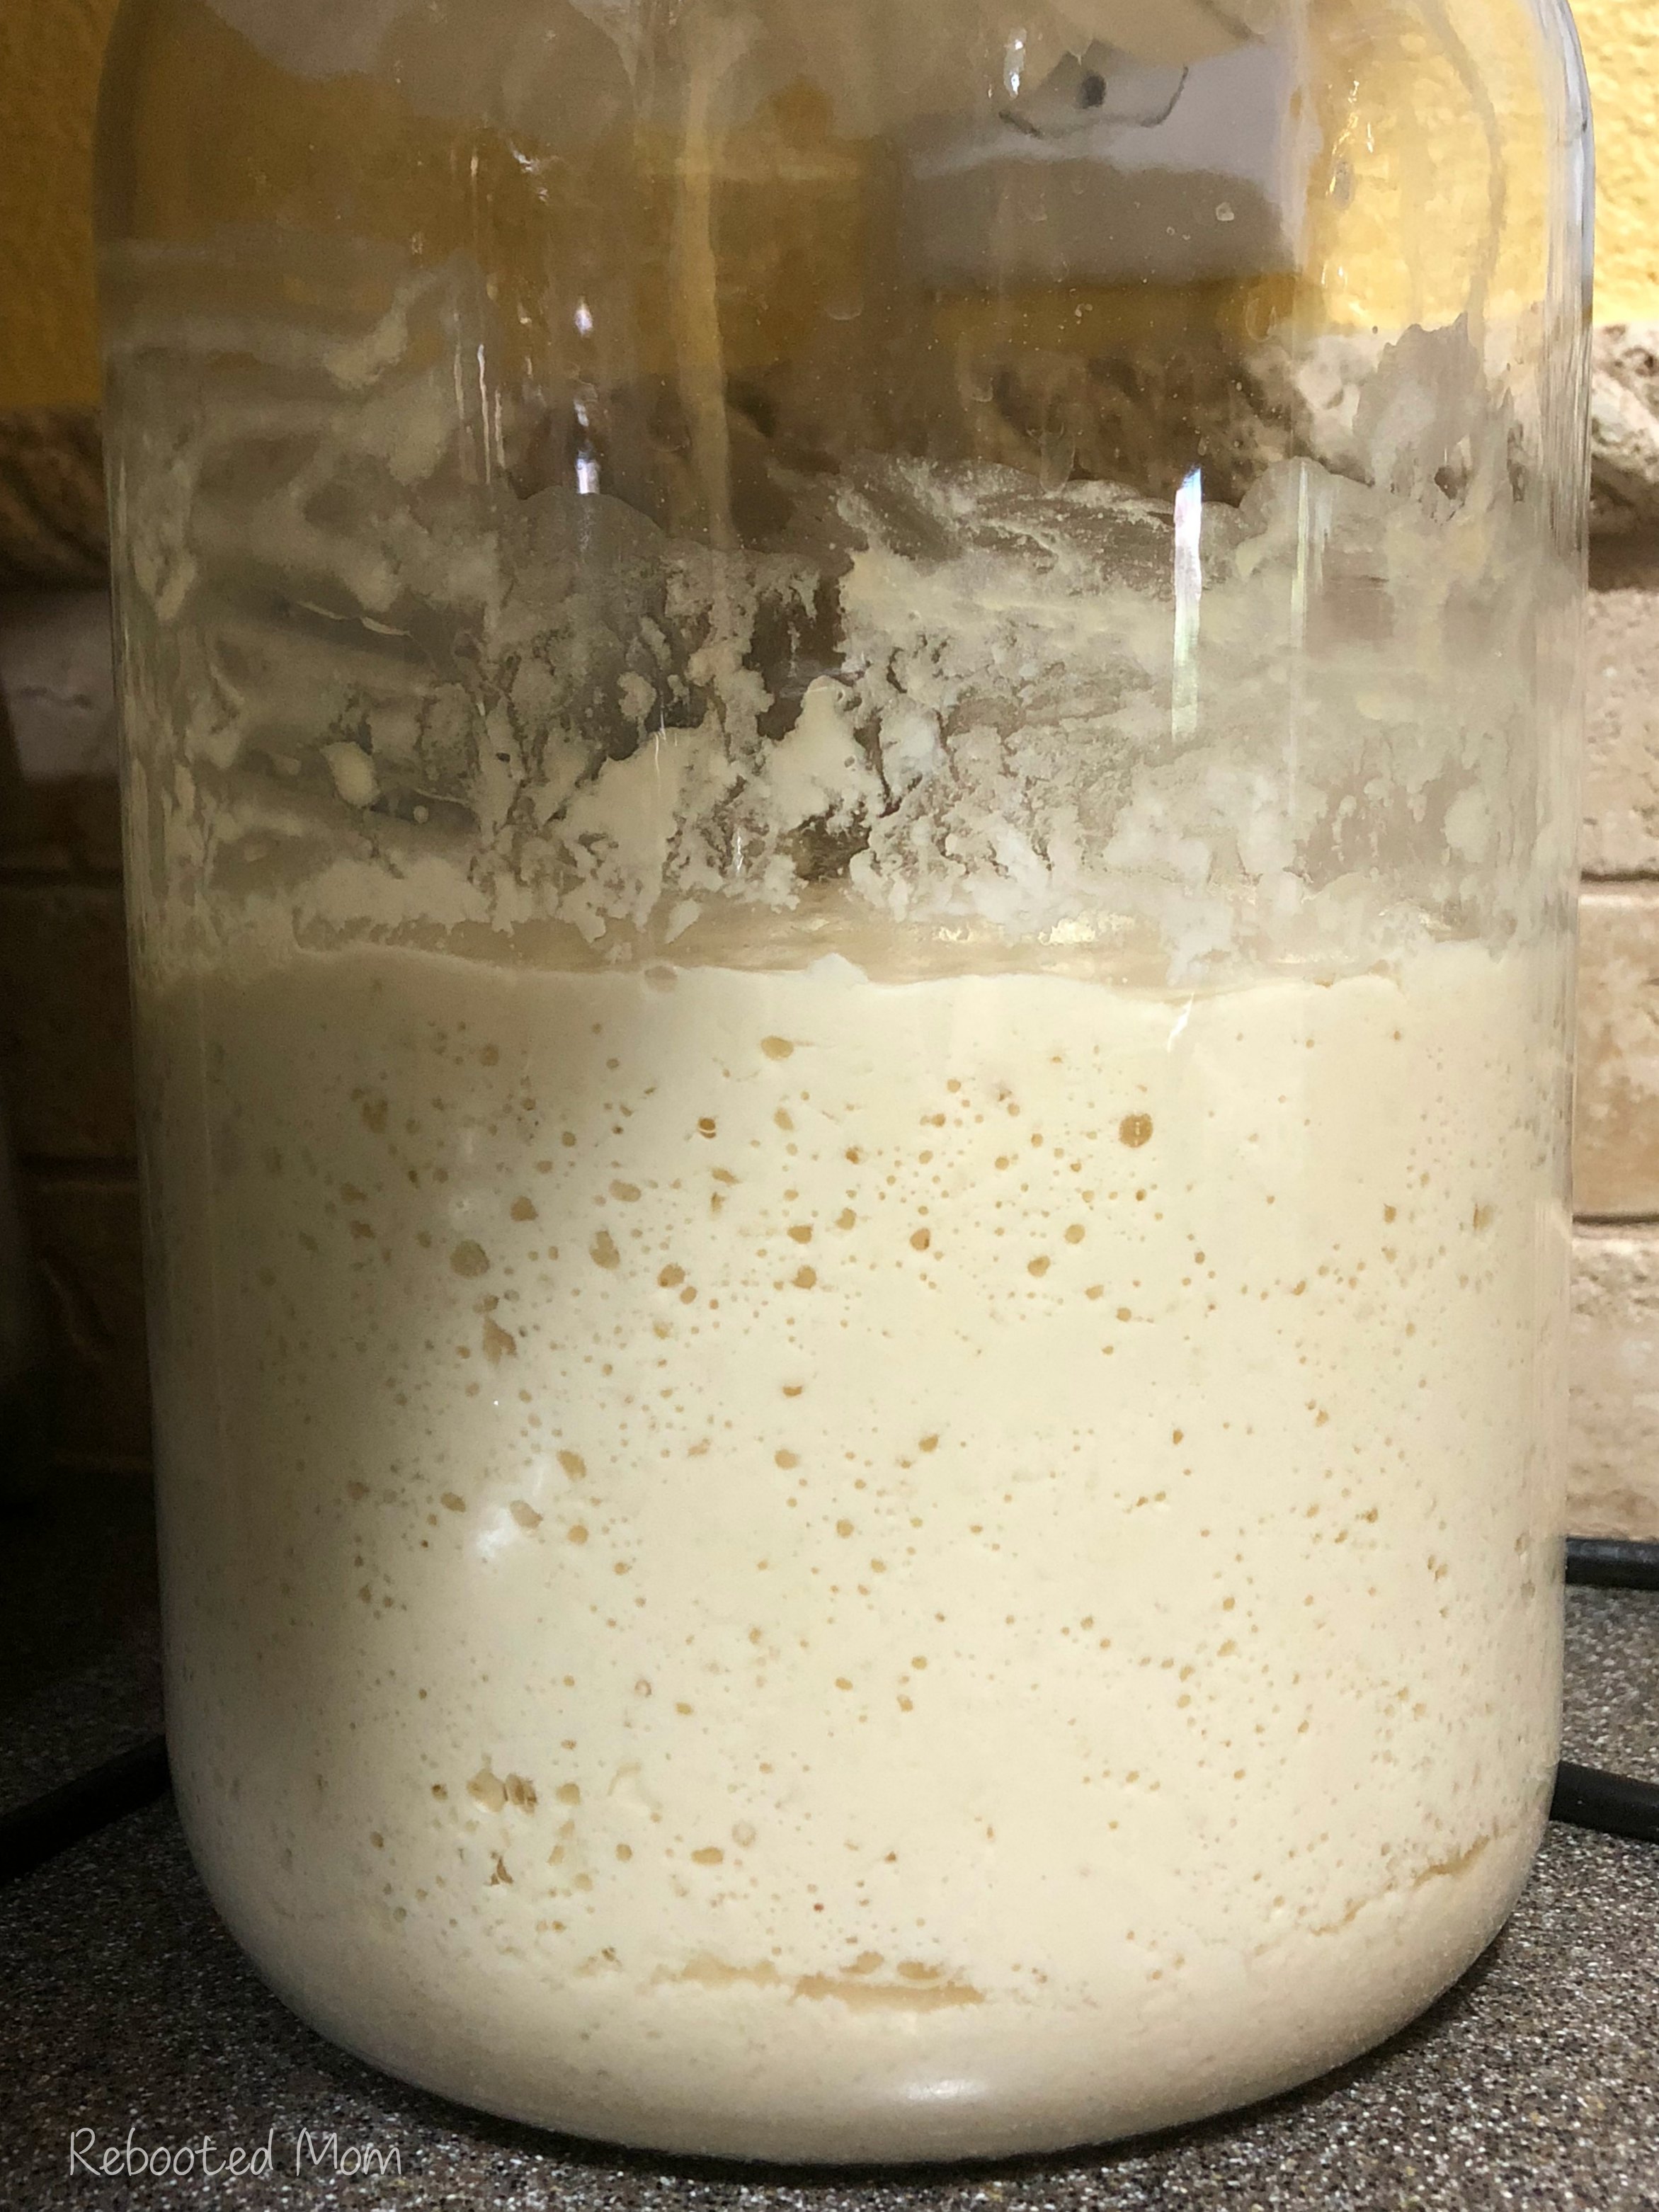 Gallon jar of kefir sourdough starter that's ready to use || This kefir sourdough starter uses natural bacteria and yeasts and is a twist on the traditional water and flour sourdough starter.